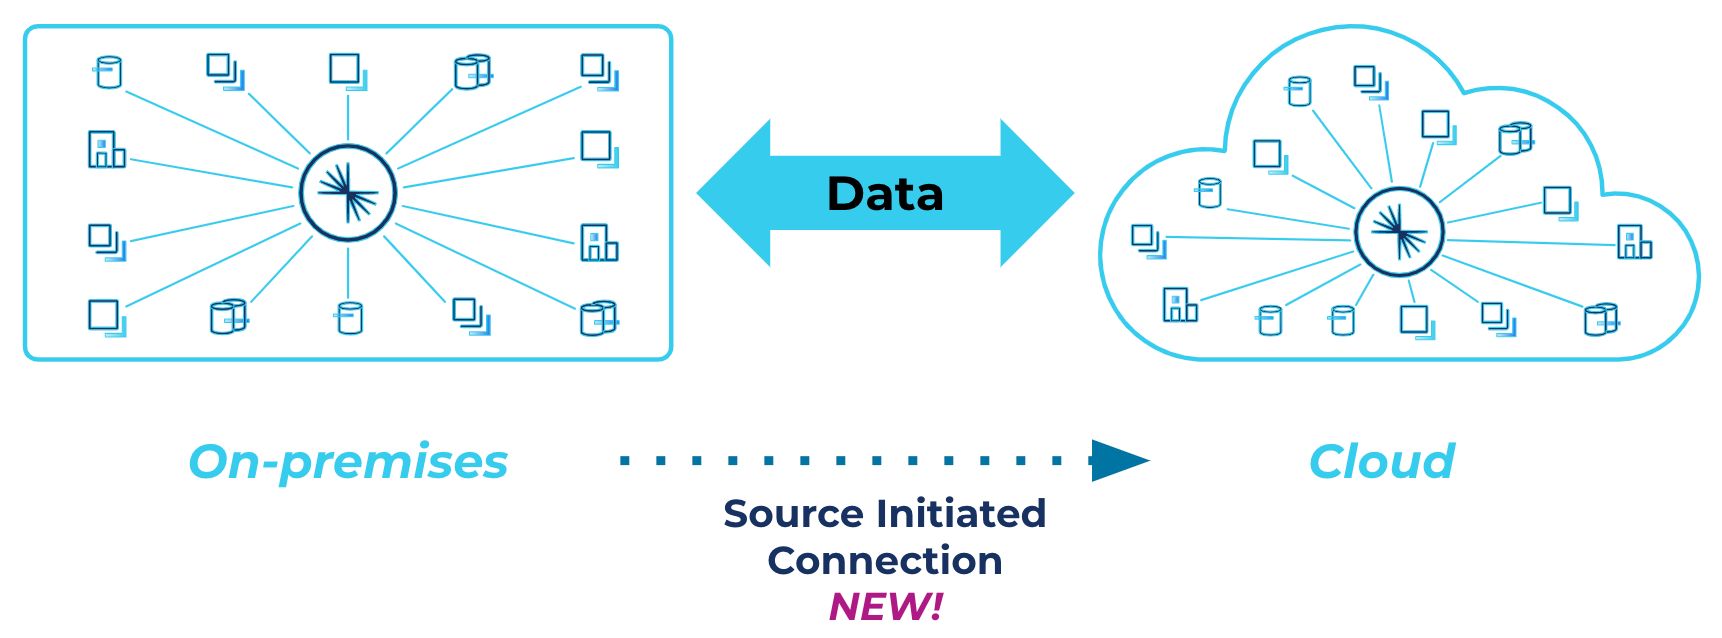 Source-initiated links ensure secure data migration and replication